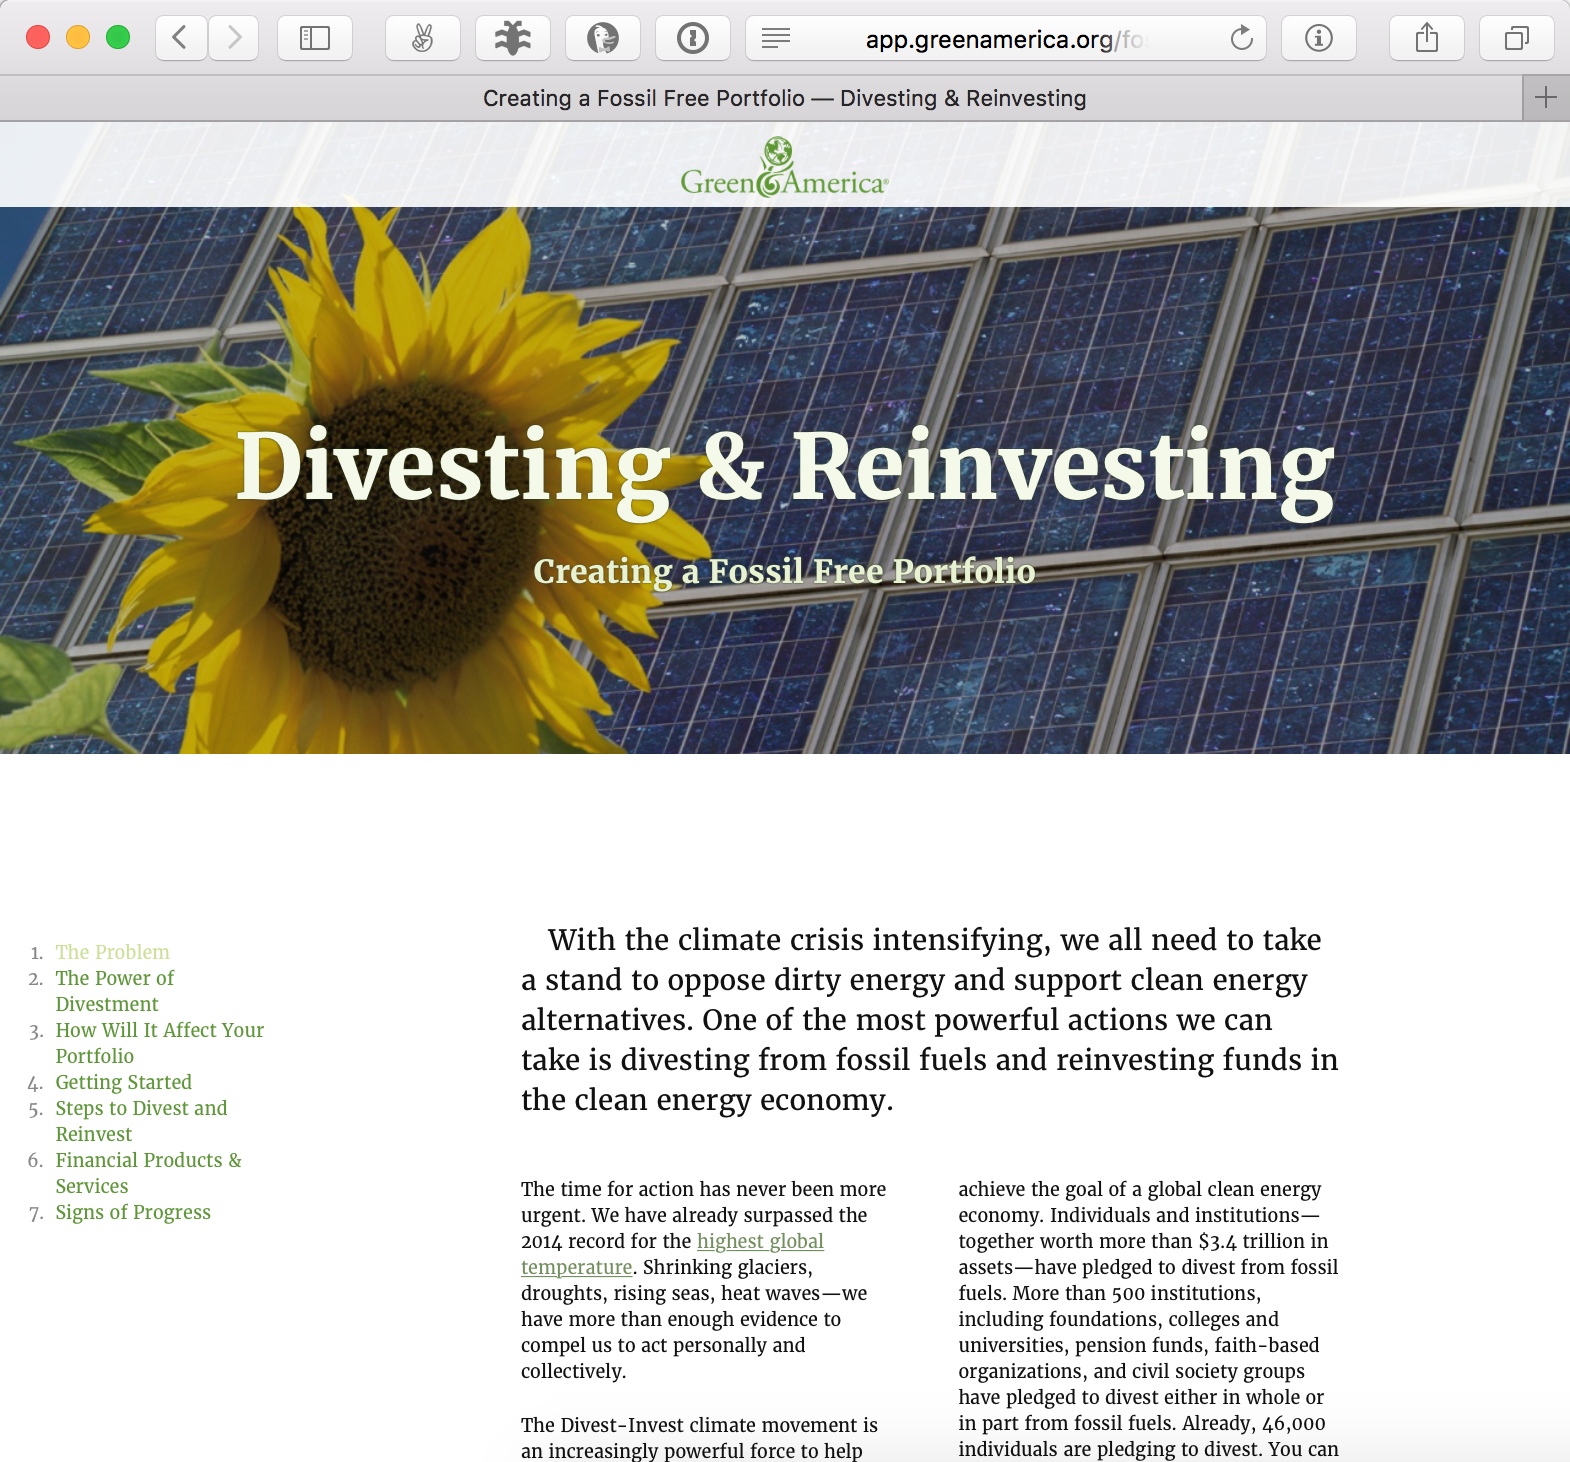 A screenshot of Green America’s Fossil Free Divestment guide